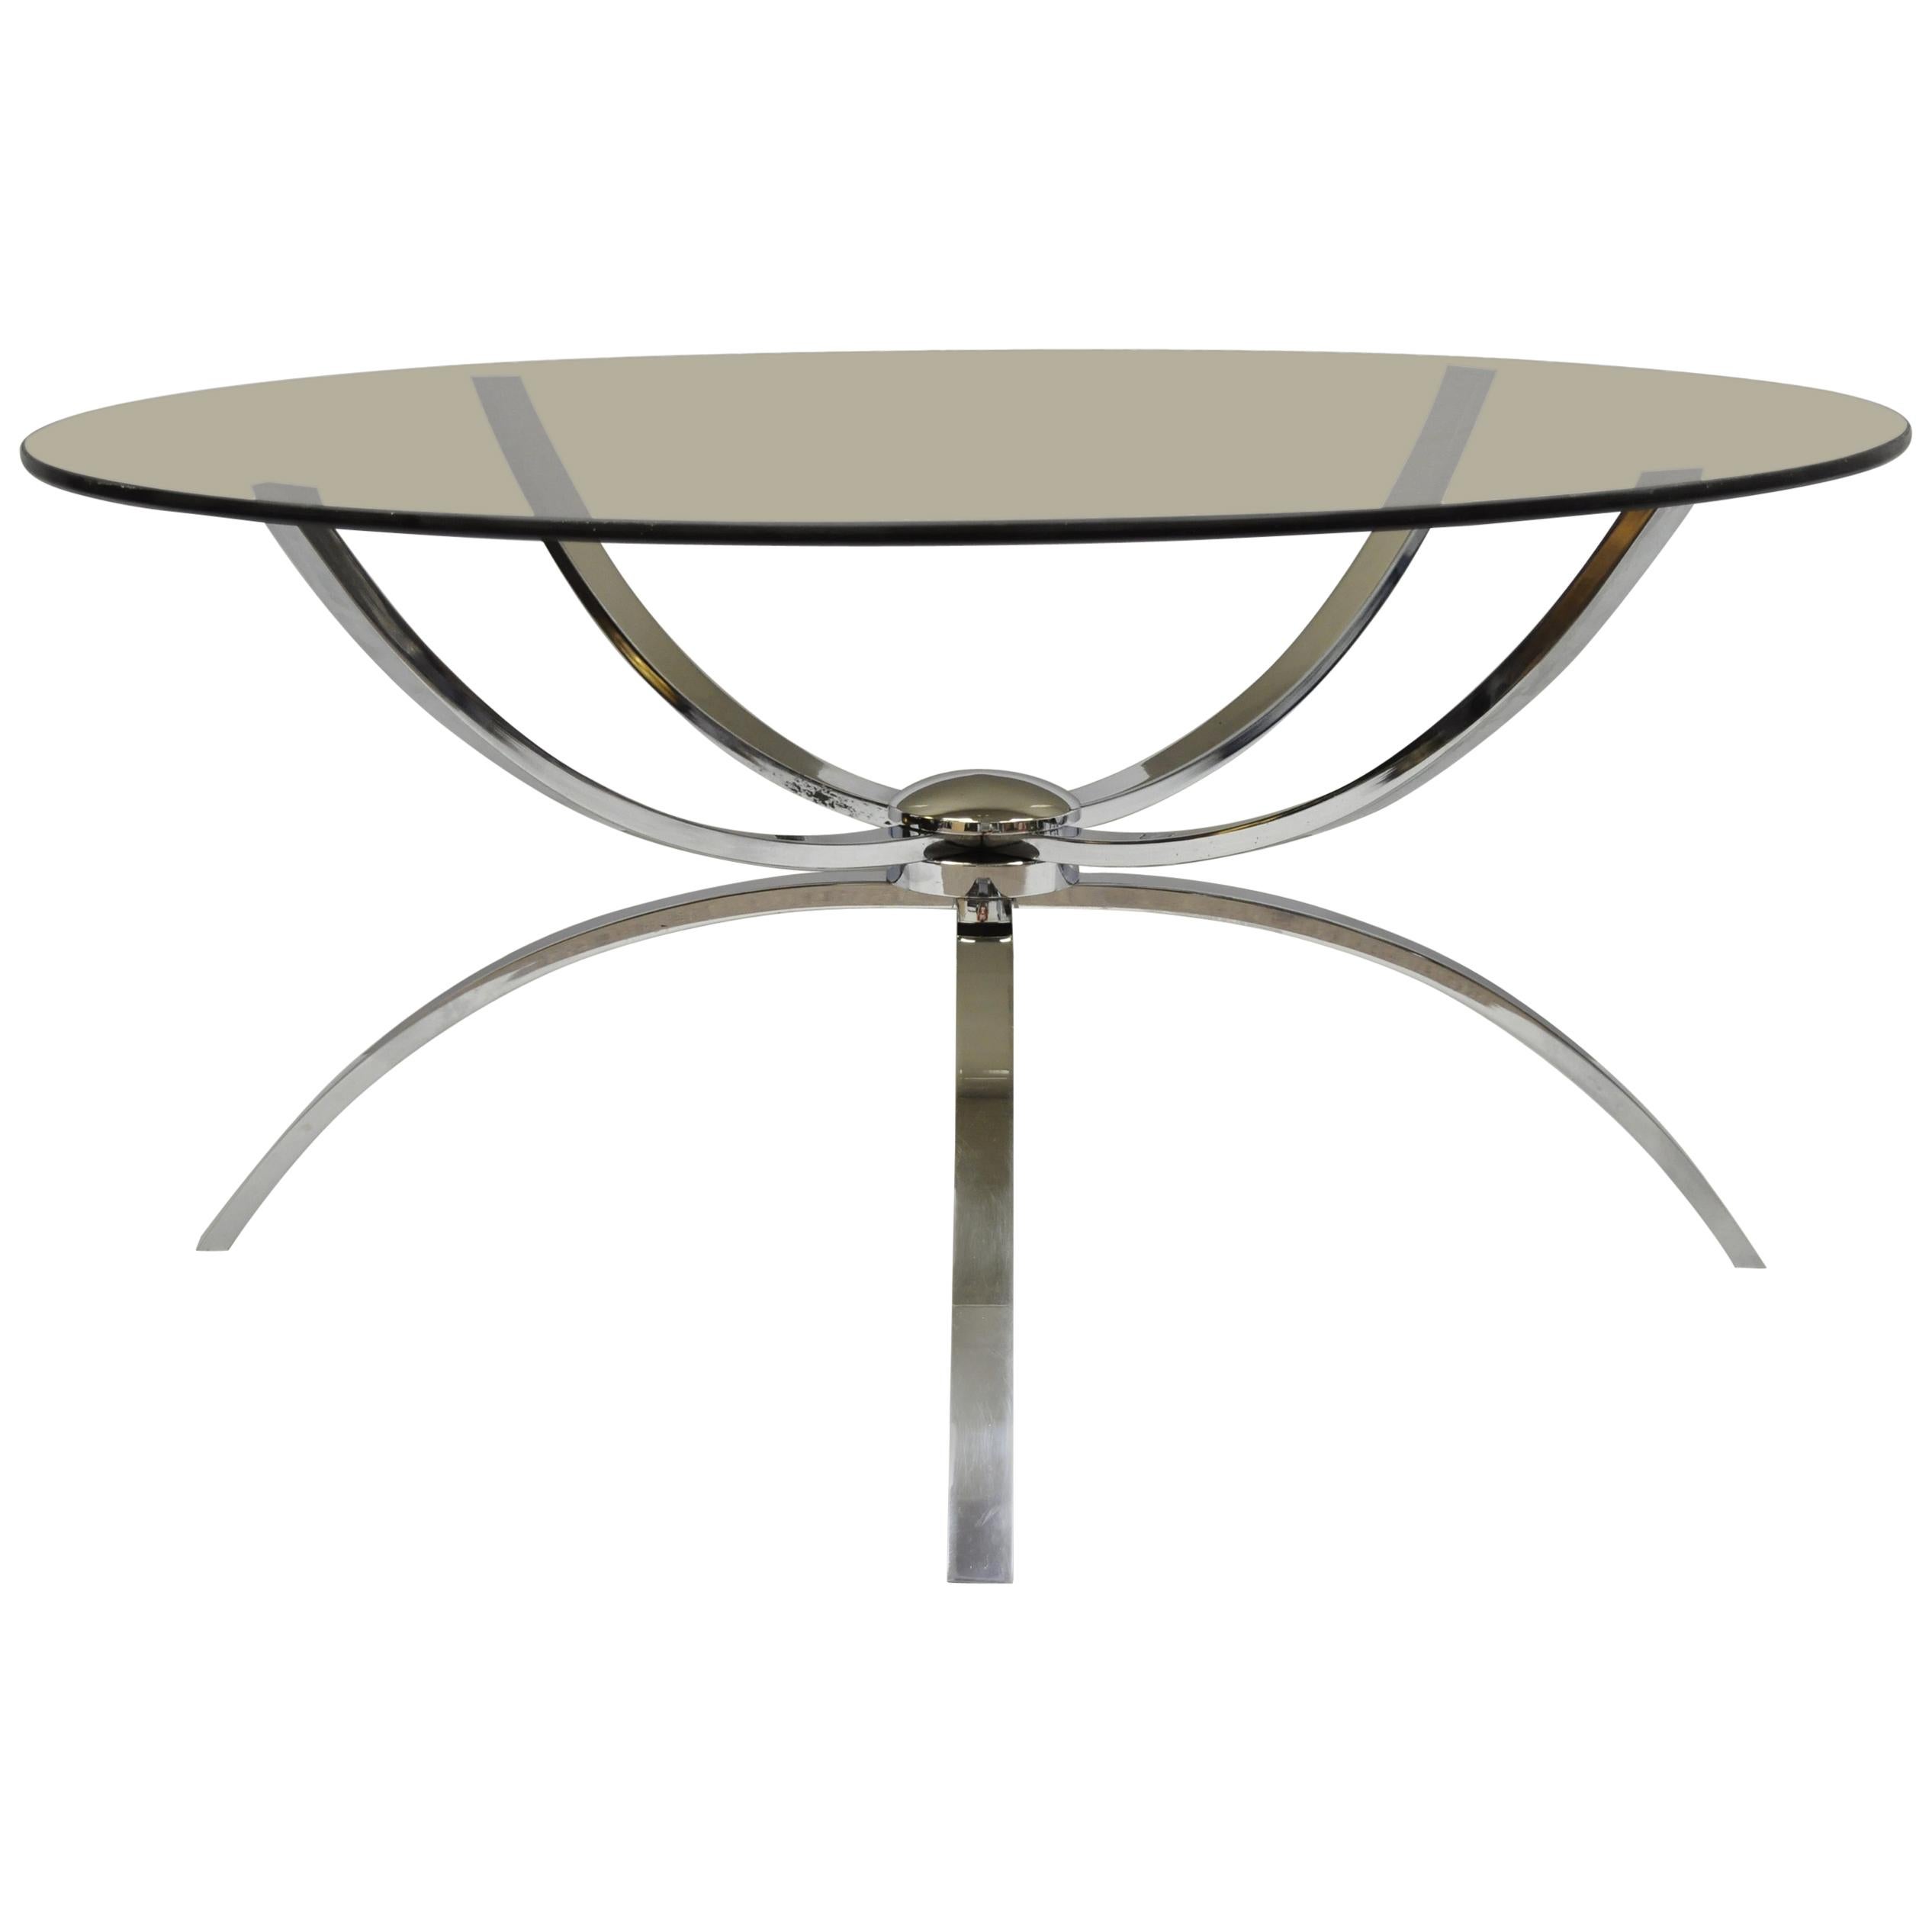 Midcentury Italian Modern Chrome Steel Spider Base Round Glass Top Coffee Table For Sale